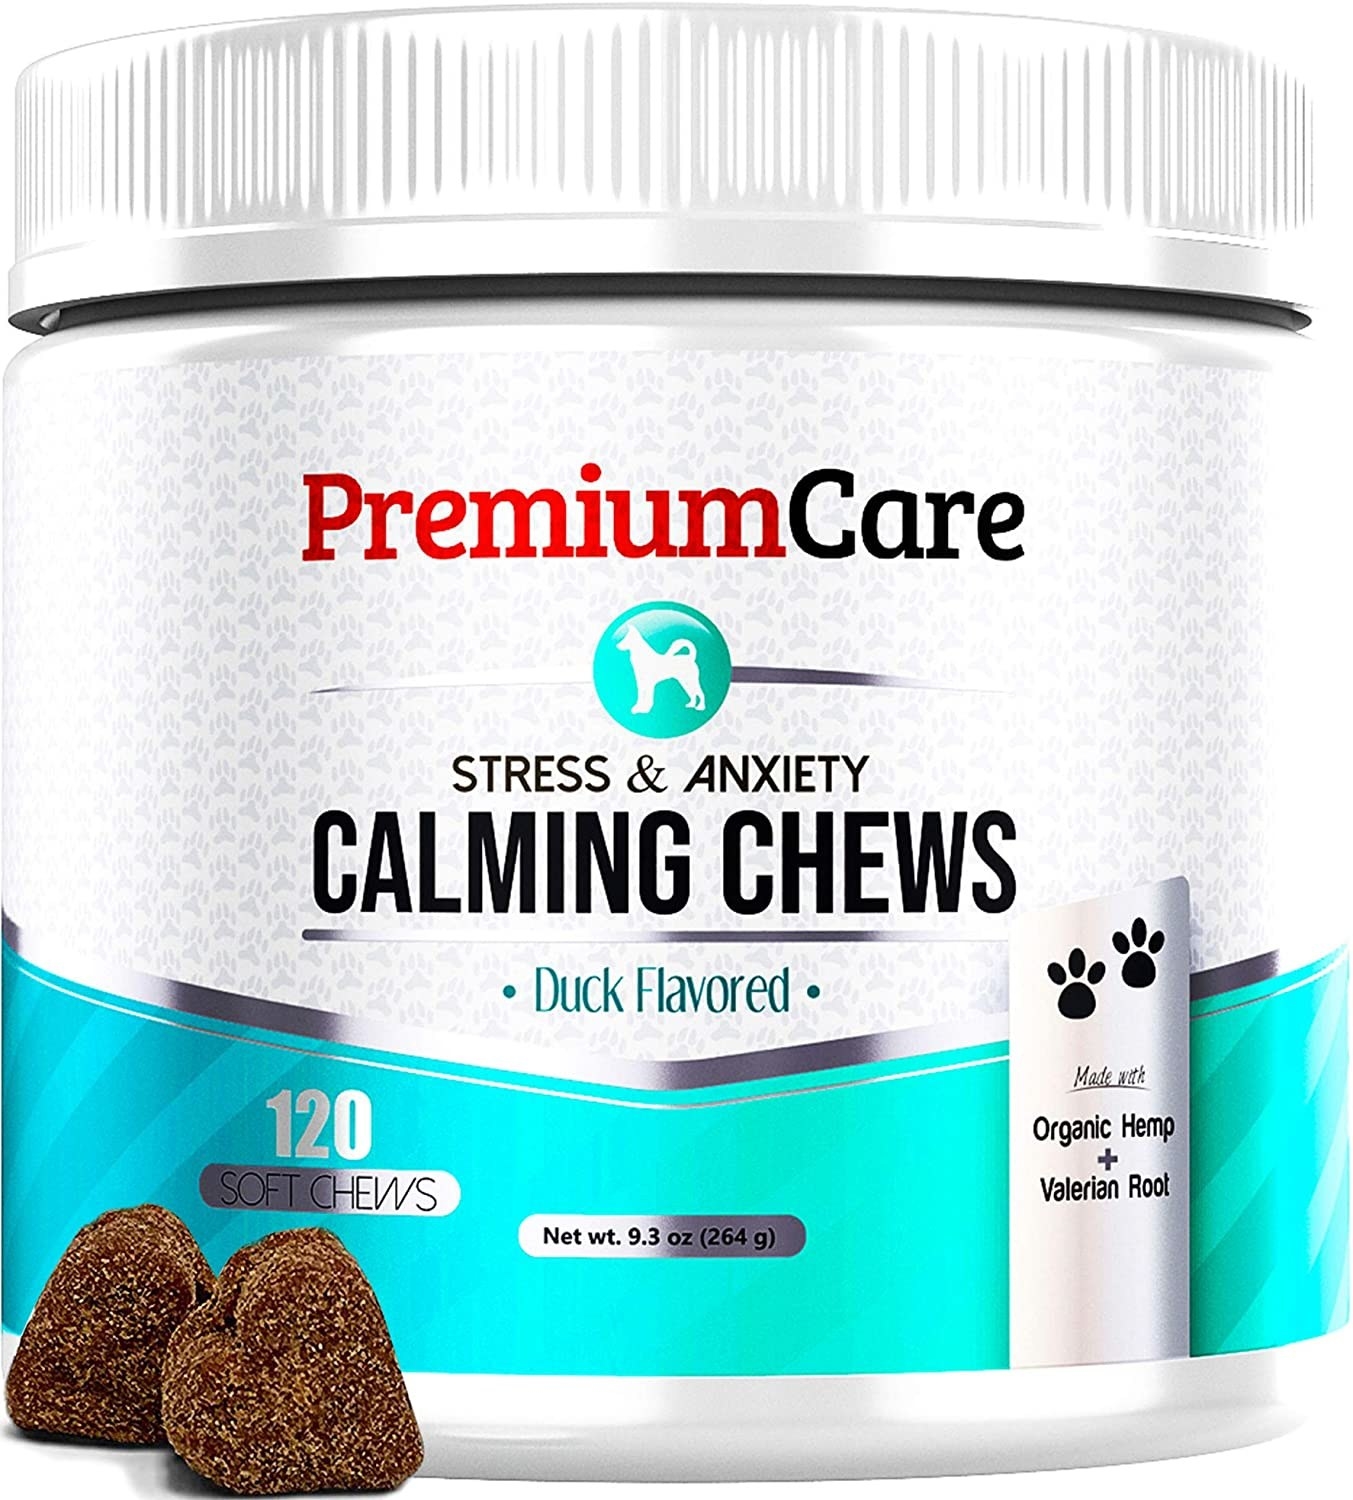 A bottle of duck flavored stress and anxiety calming chews 